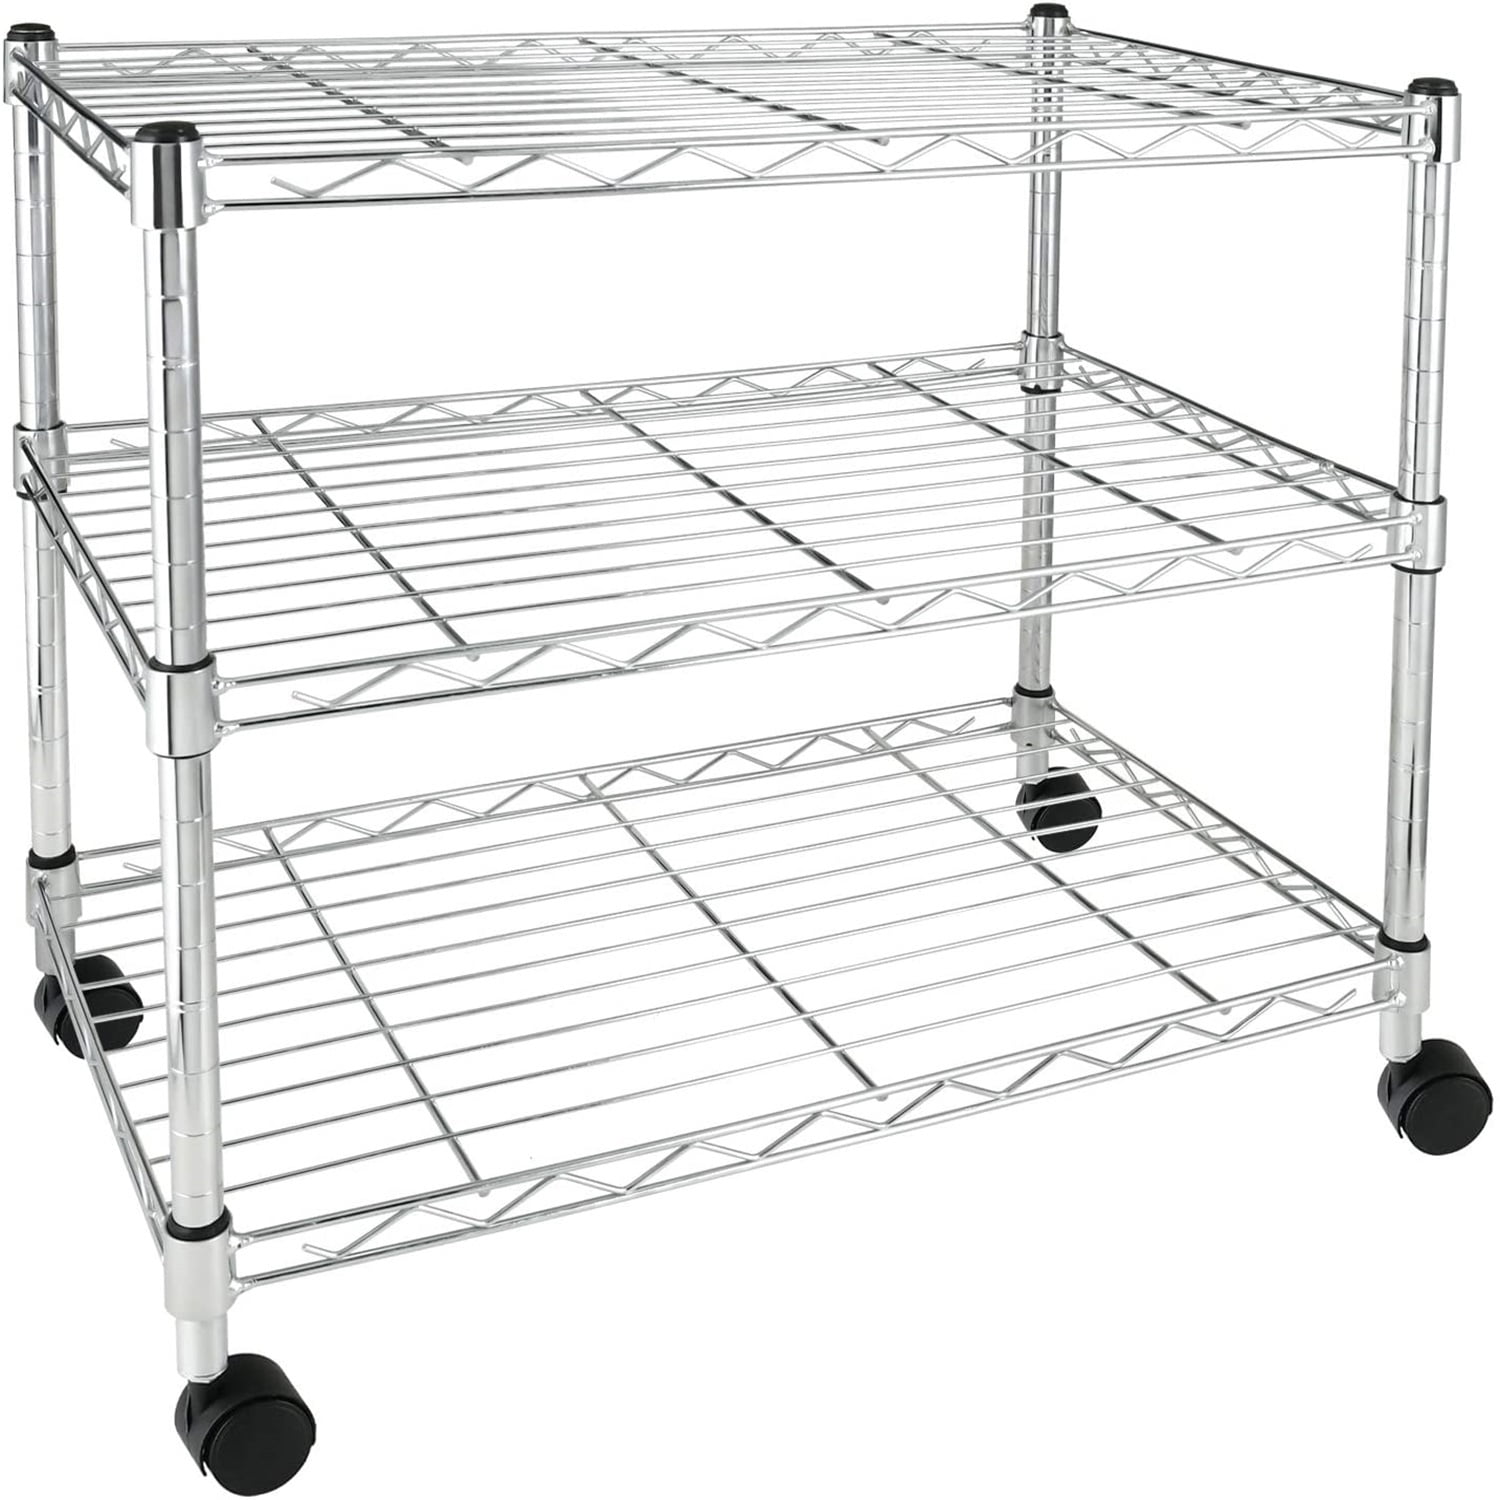 Canddidliike 3-Shelf Storage Wire Shelves with Wheels, 3 Tiers Standing Shelving Units Adjustable Metal Organizer Wire Rack - Silver